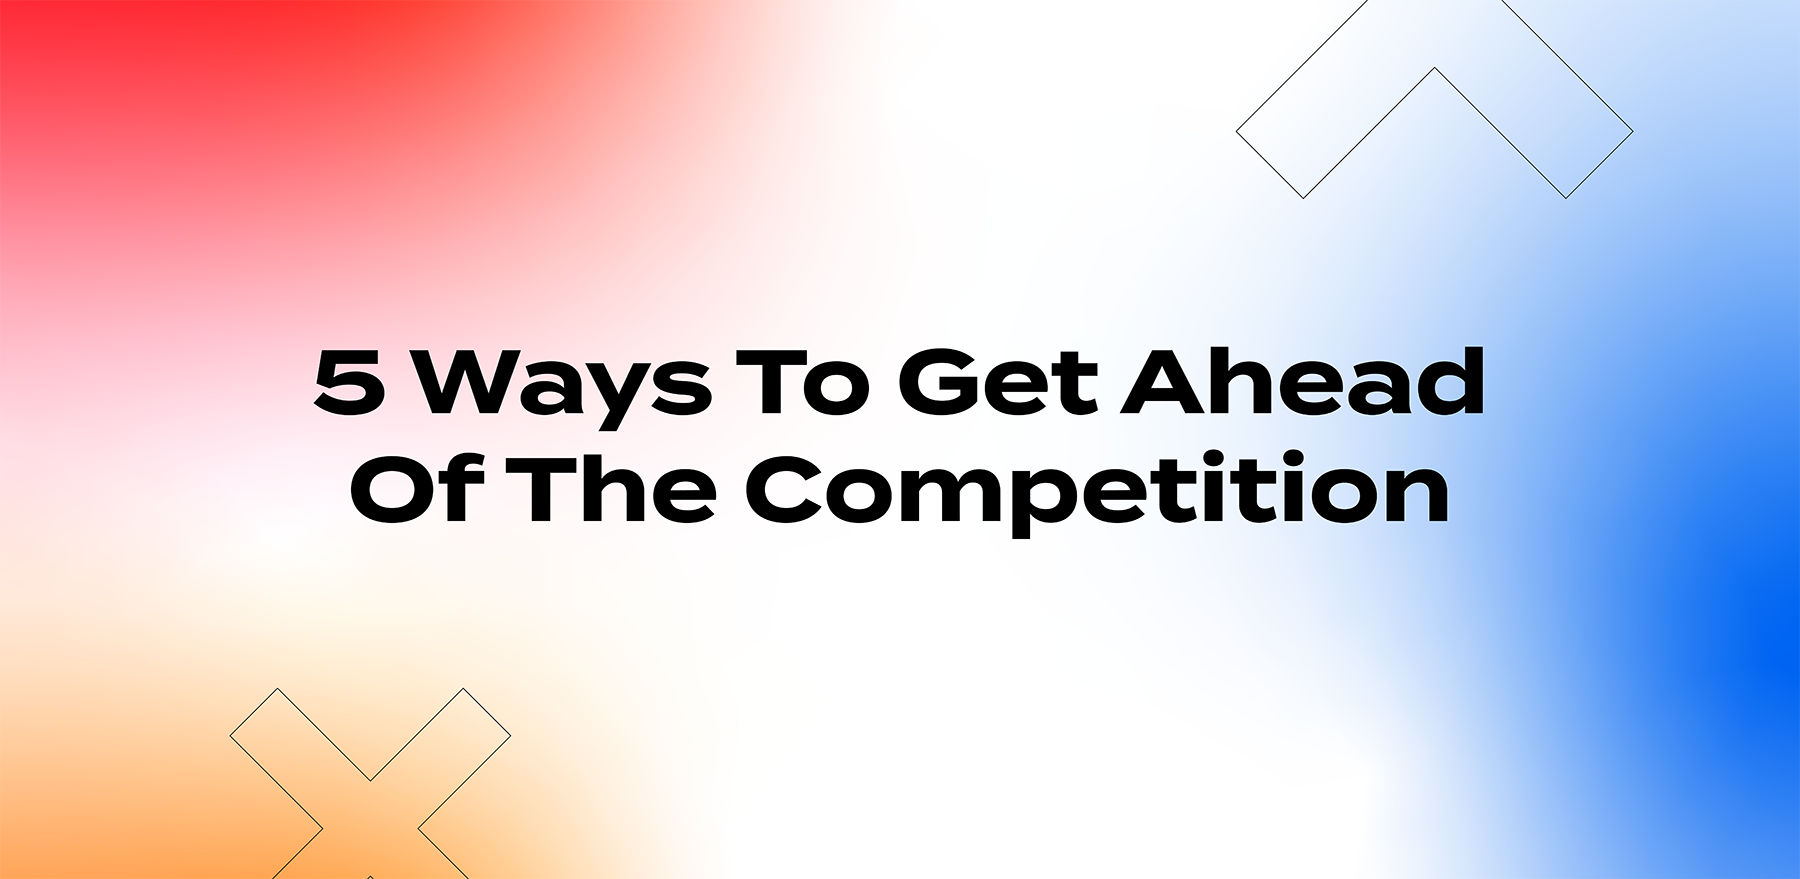 5 ways to get ahead of the competition